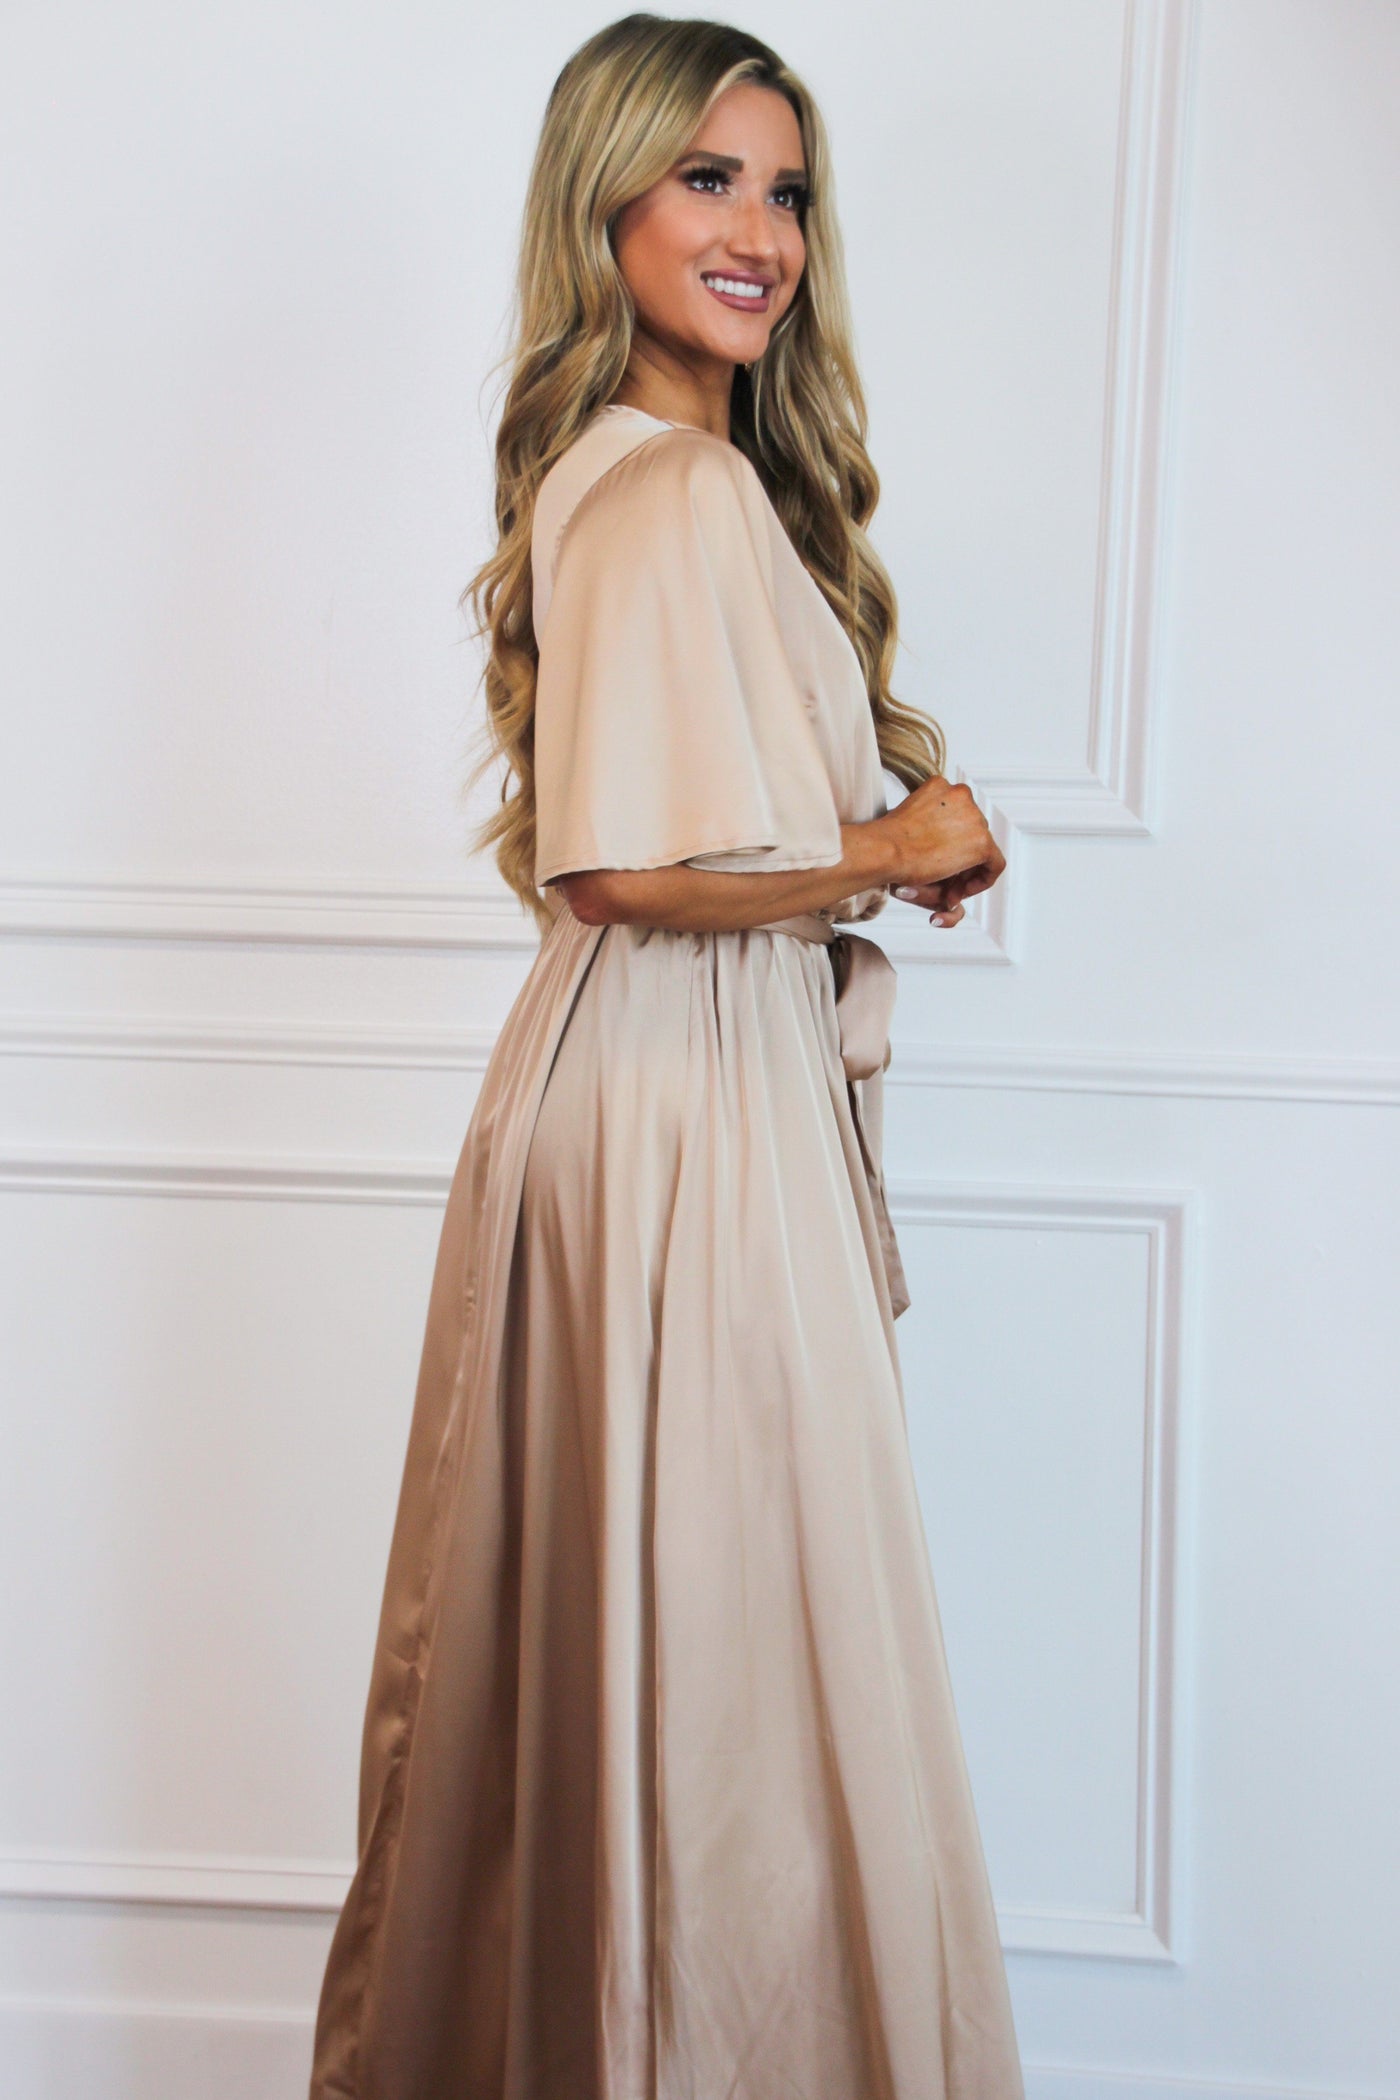 Raleigh Satin Maxi Dress: Champagne - Bella and Bloom Boutique